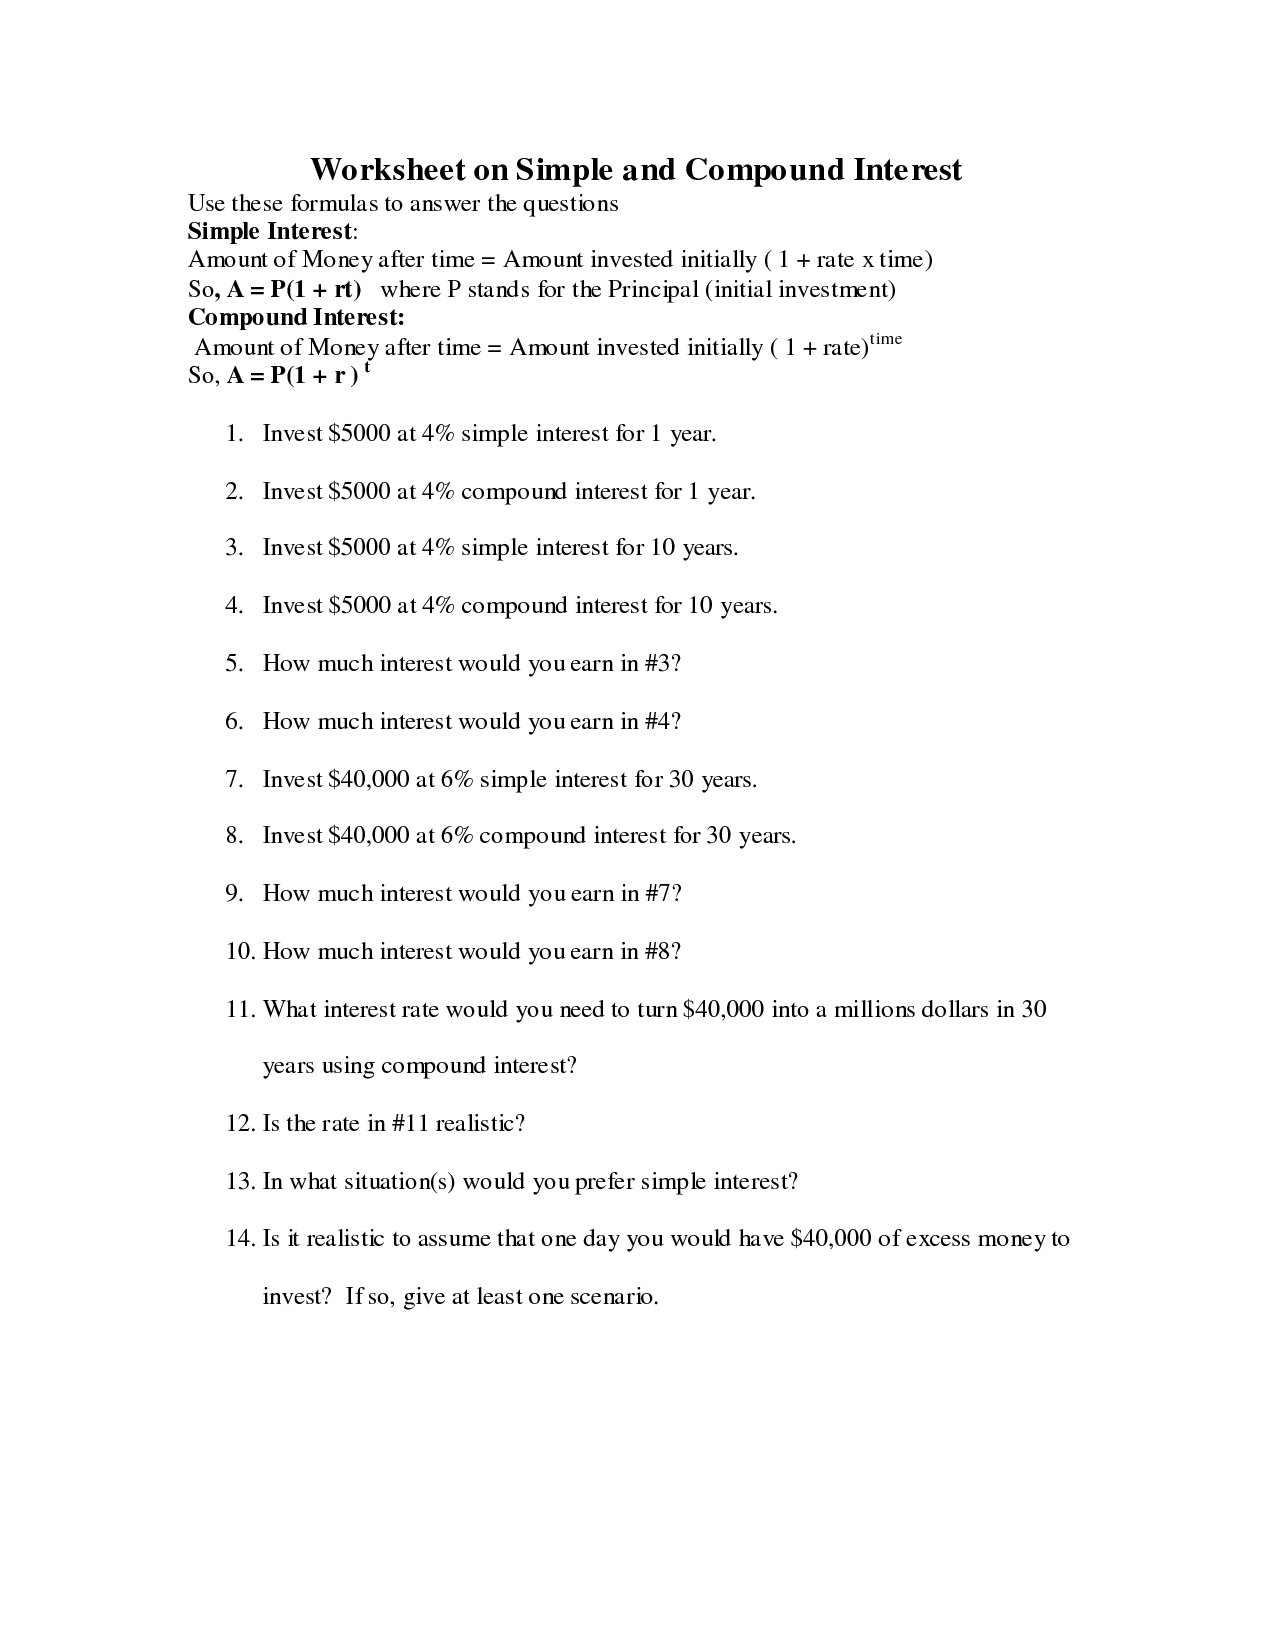 Simple and Compound Interest Worksheets Image